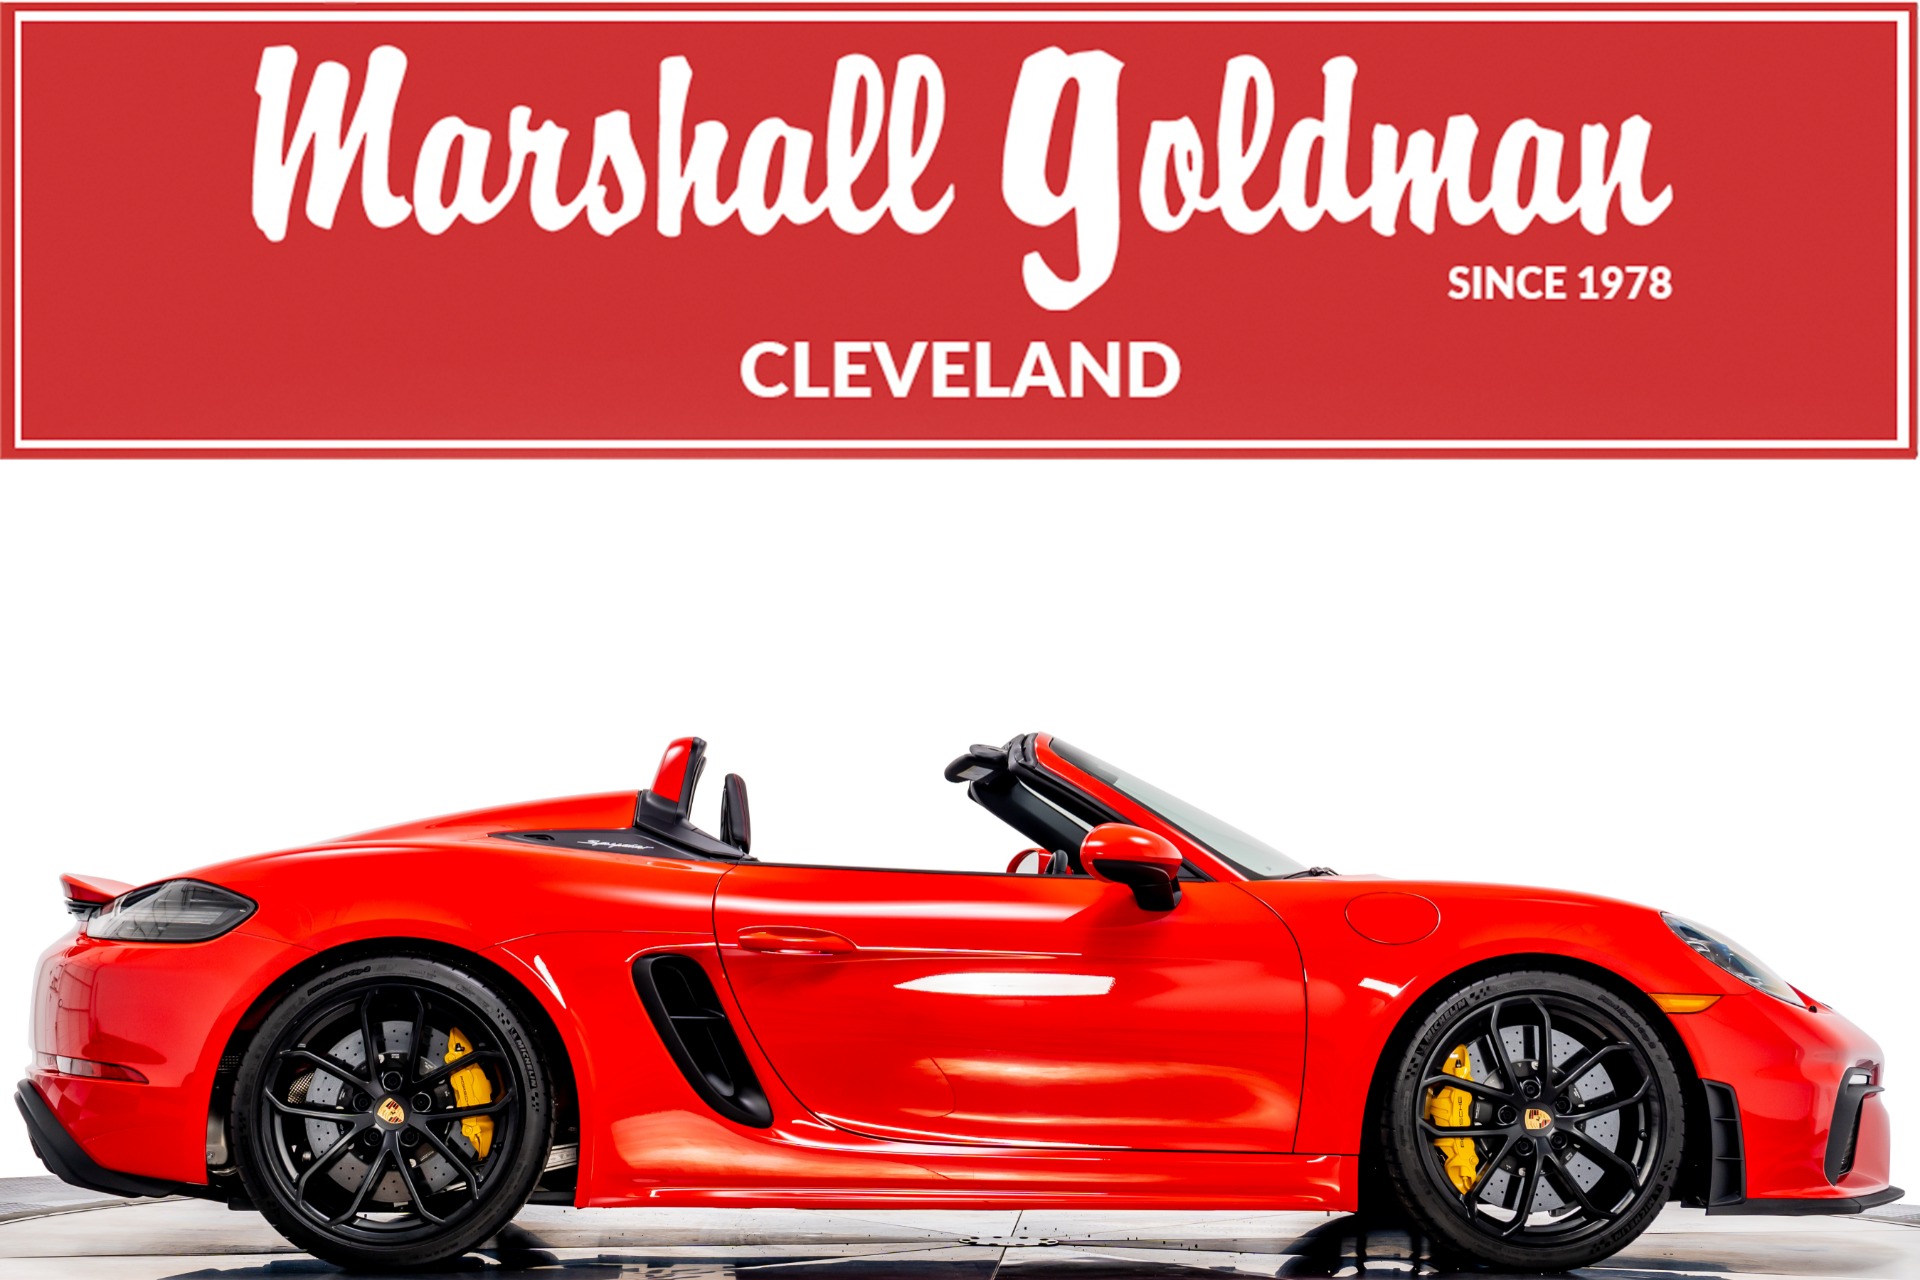 Used 2020 Porsche 718 Boxster Spyder For Sale (Sold) | Marshall Goldman  Cleveland Stock #W21105